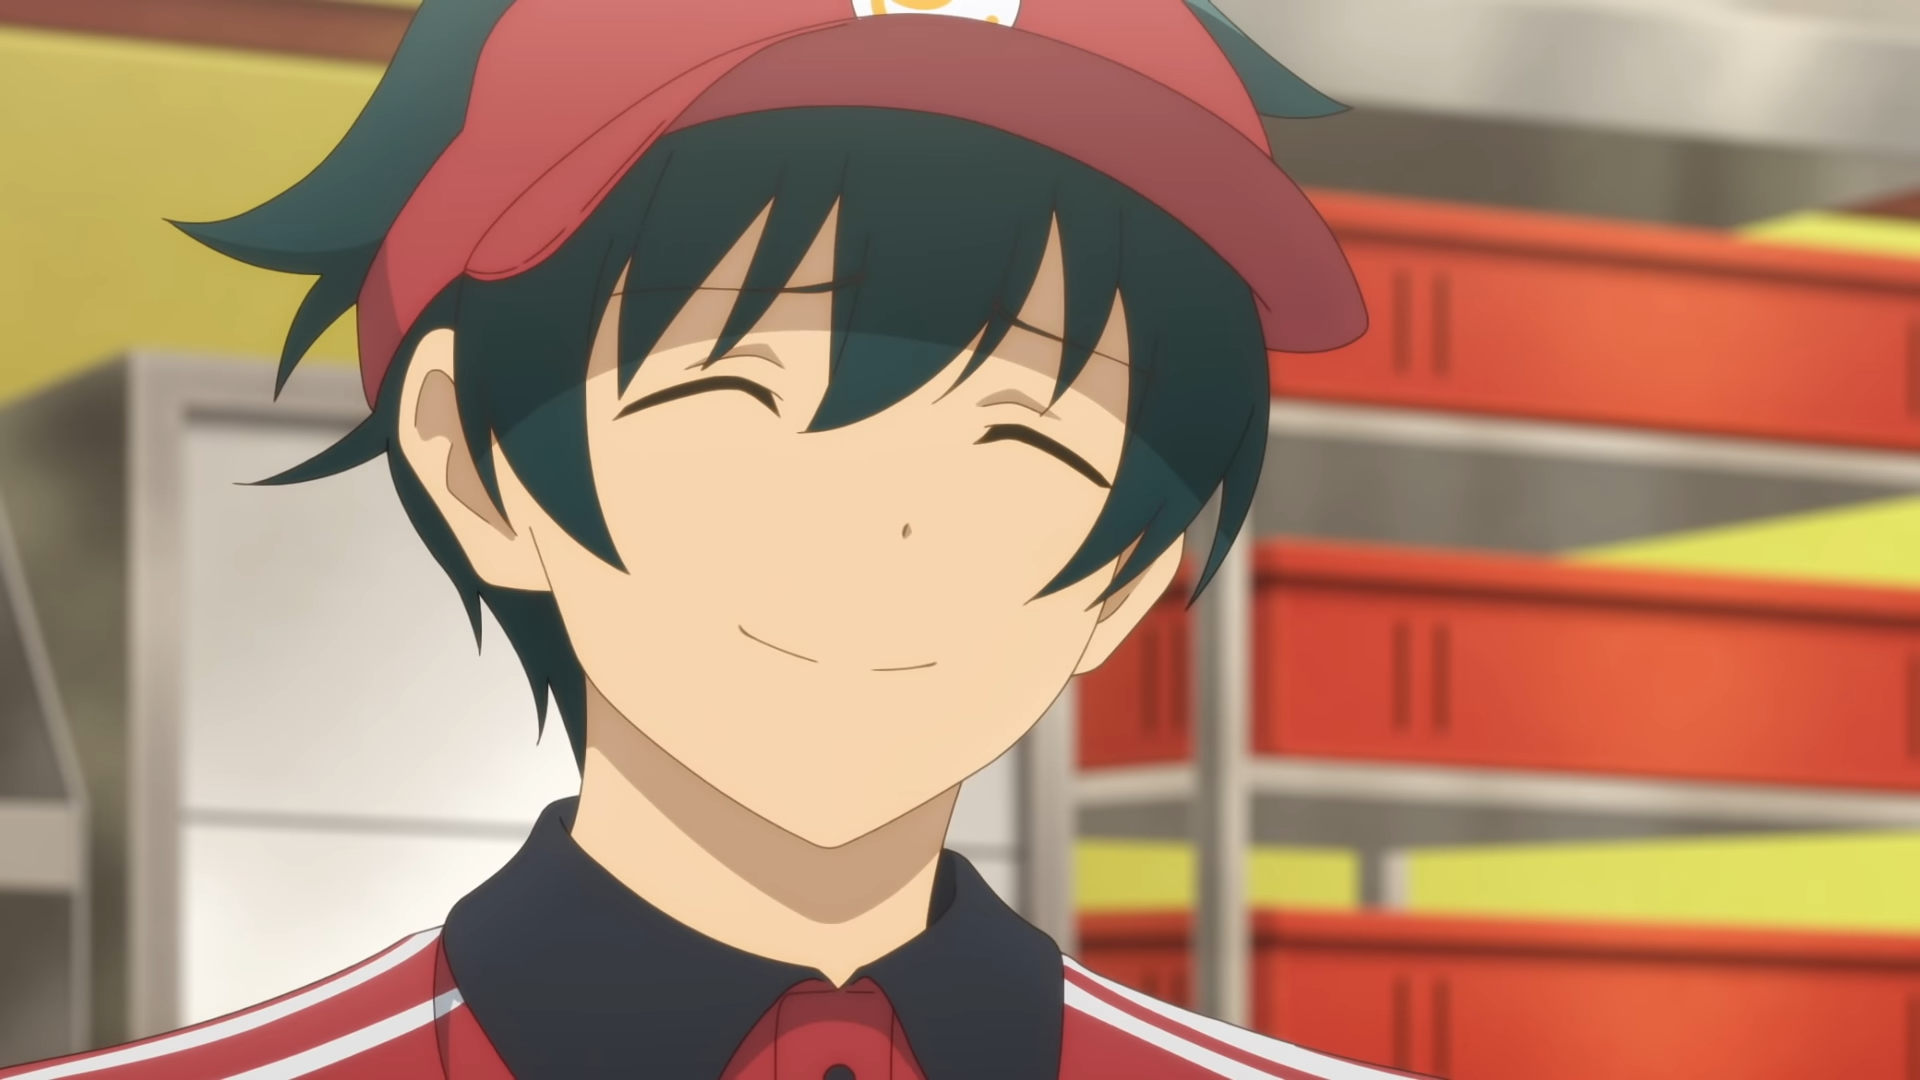 The Devil Is A Part-Timer!!: Is Devil A Bad Guy?